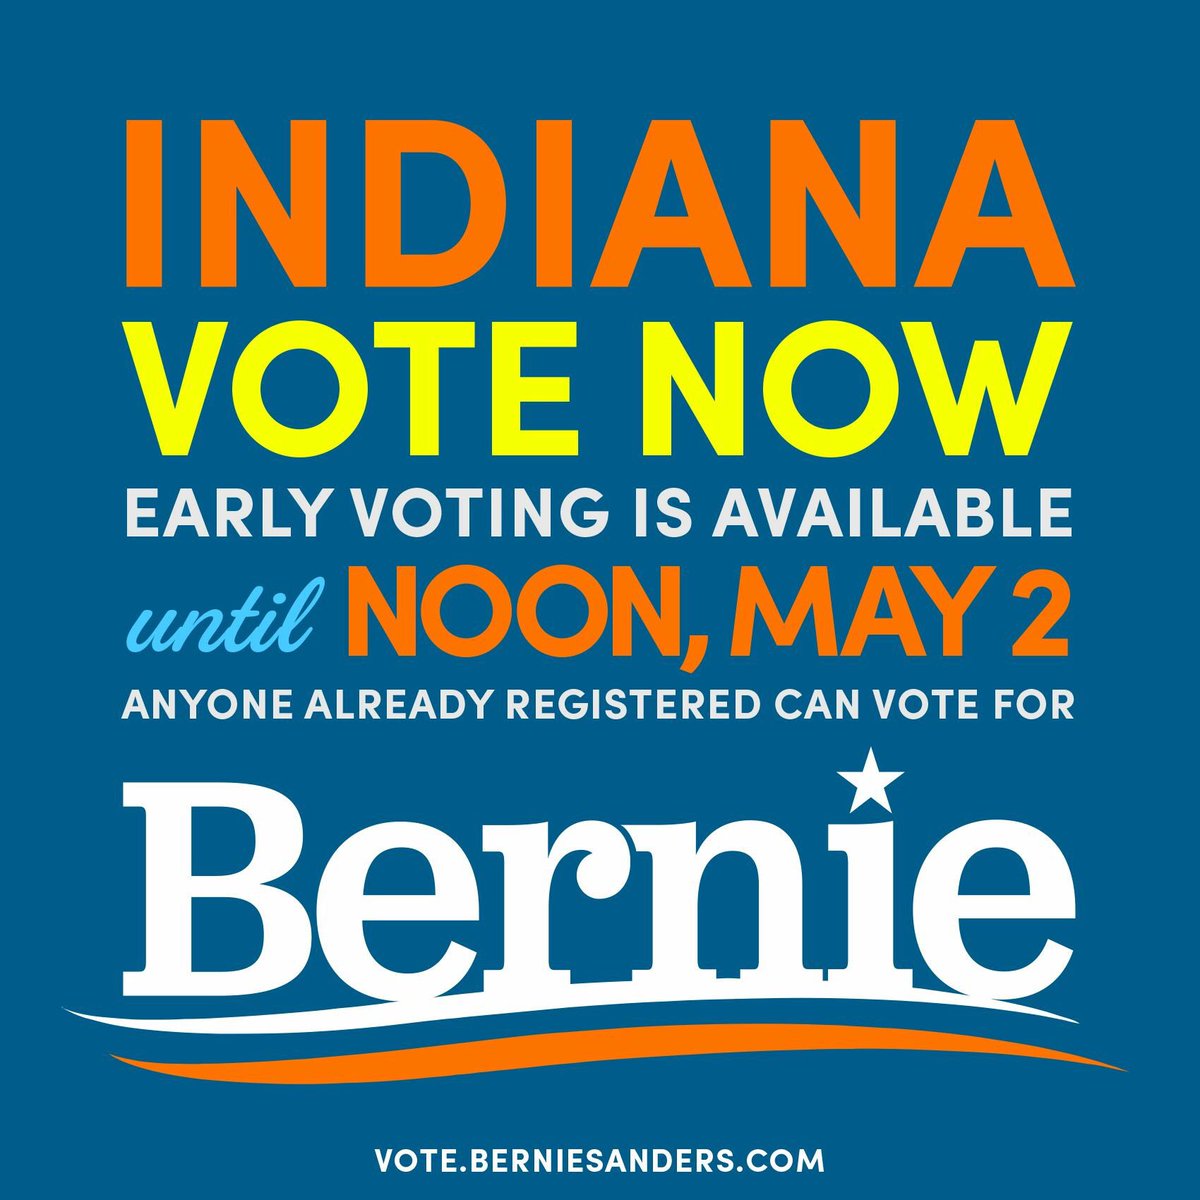 #Hoosiers did you know you can vote early? #IndianaPrimary #OpenPrimary #BernieOrBust #vote ✌🏻️